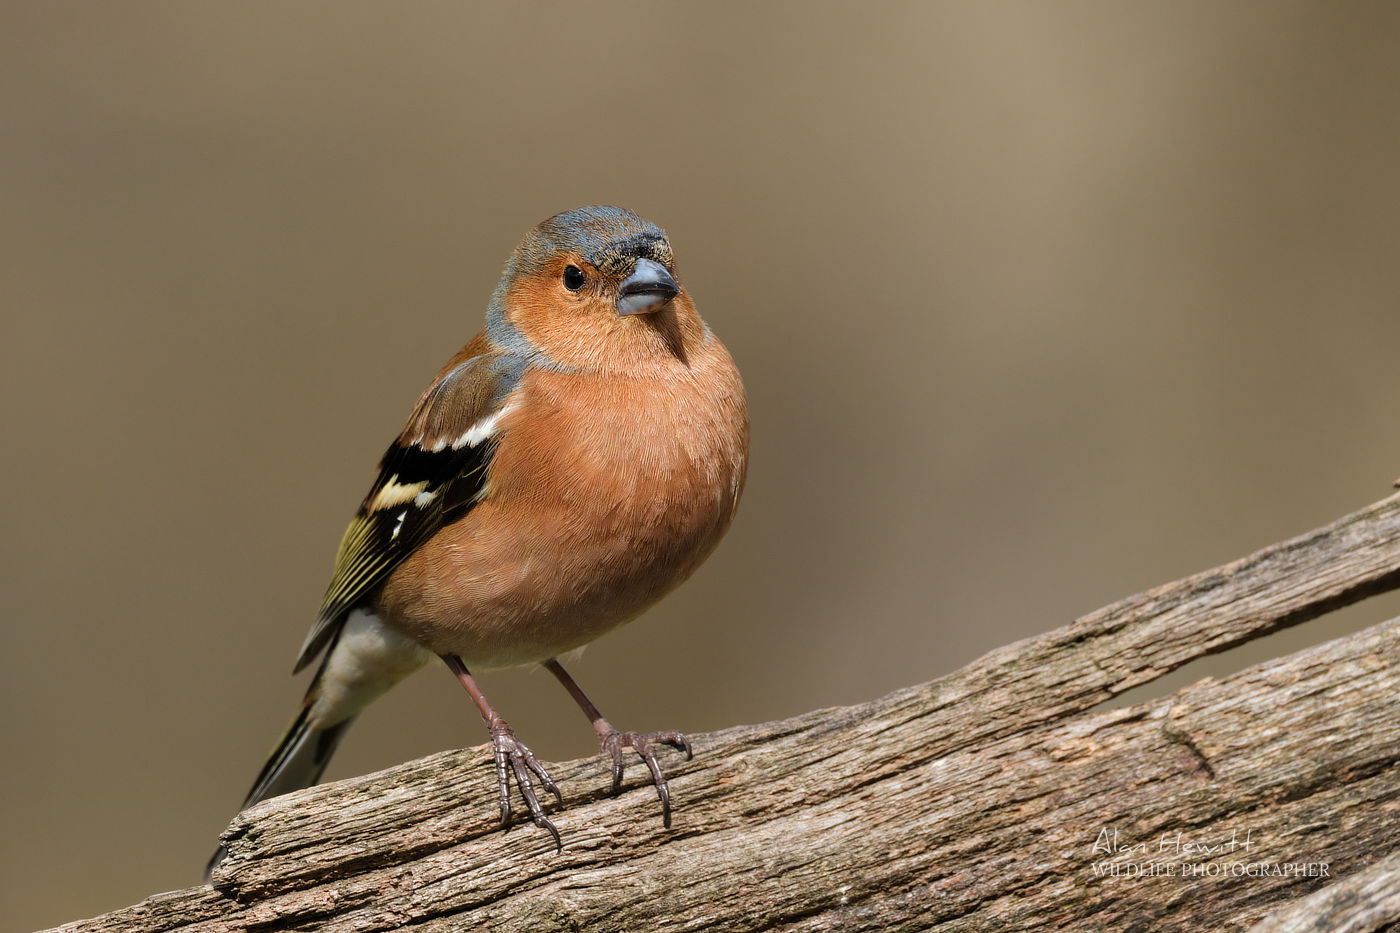 Chaffinch Fujifilm X-H2s and 150-600mm © Alan Hewitt Photography